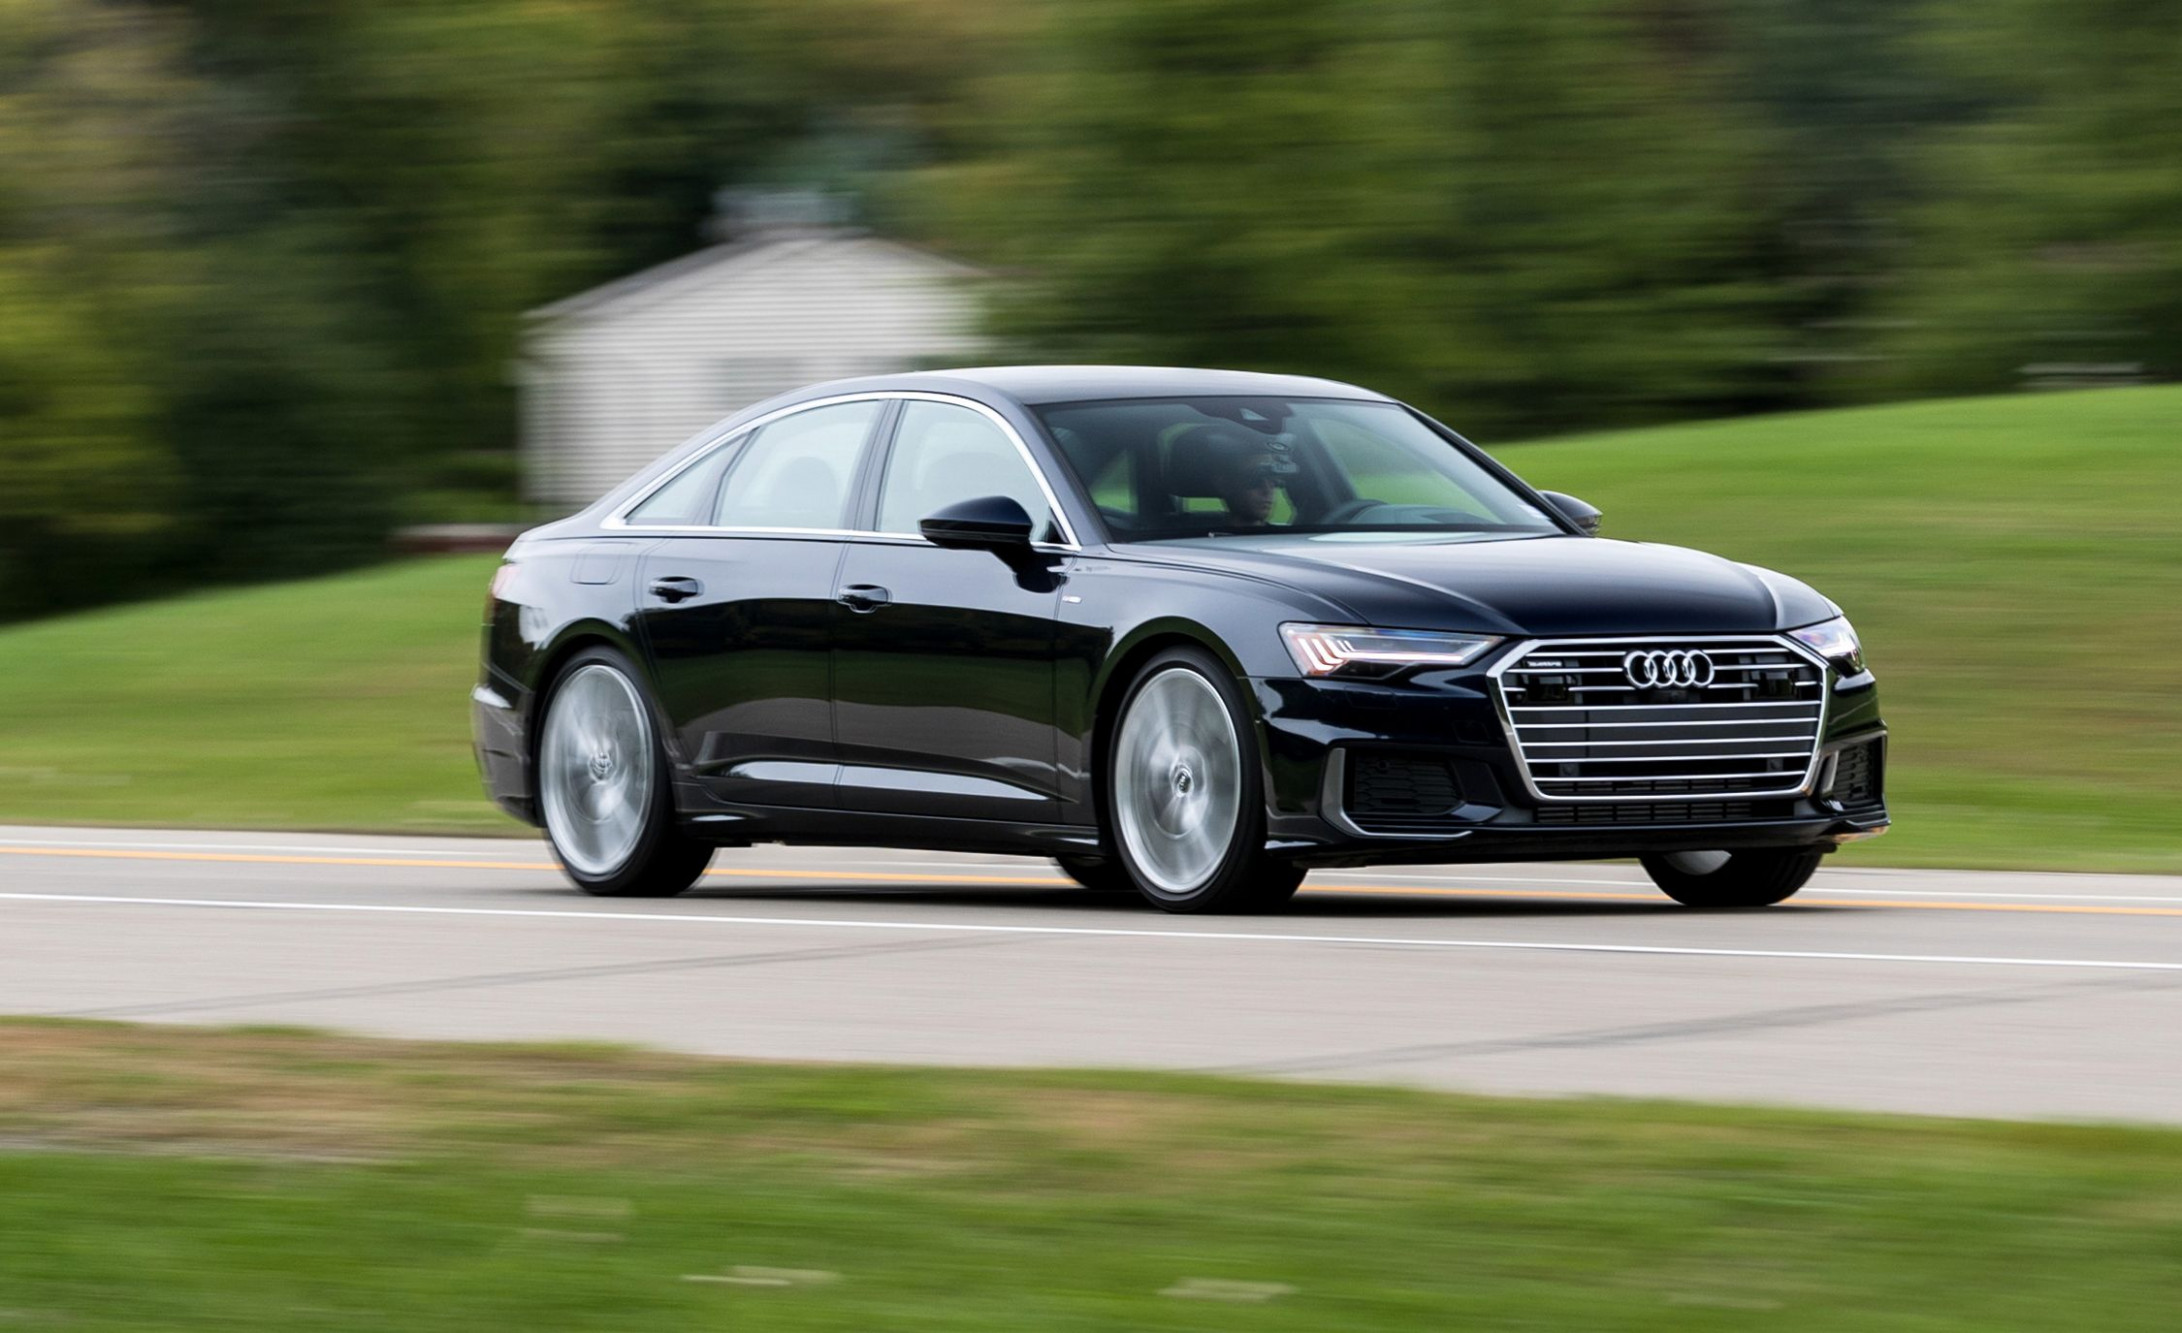 4 Audi A4 Review, Pricing, and Specs - audi a6 3